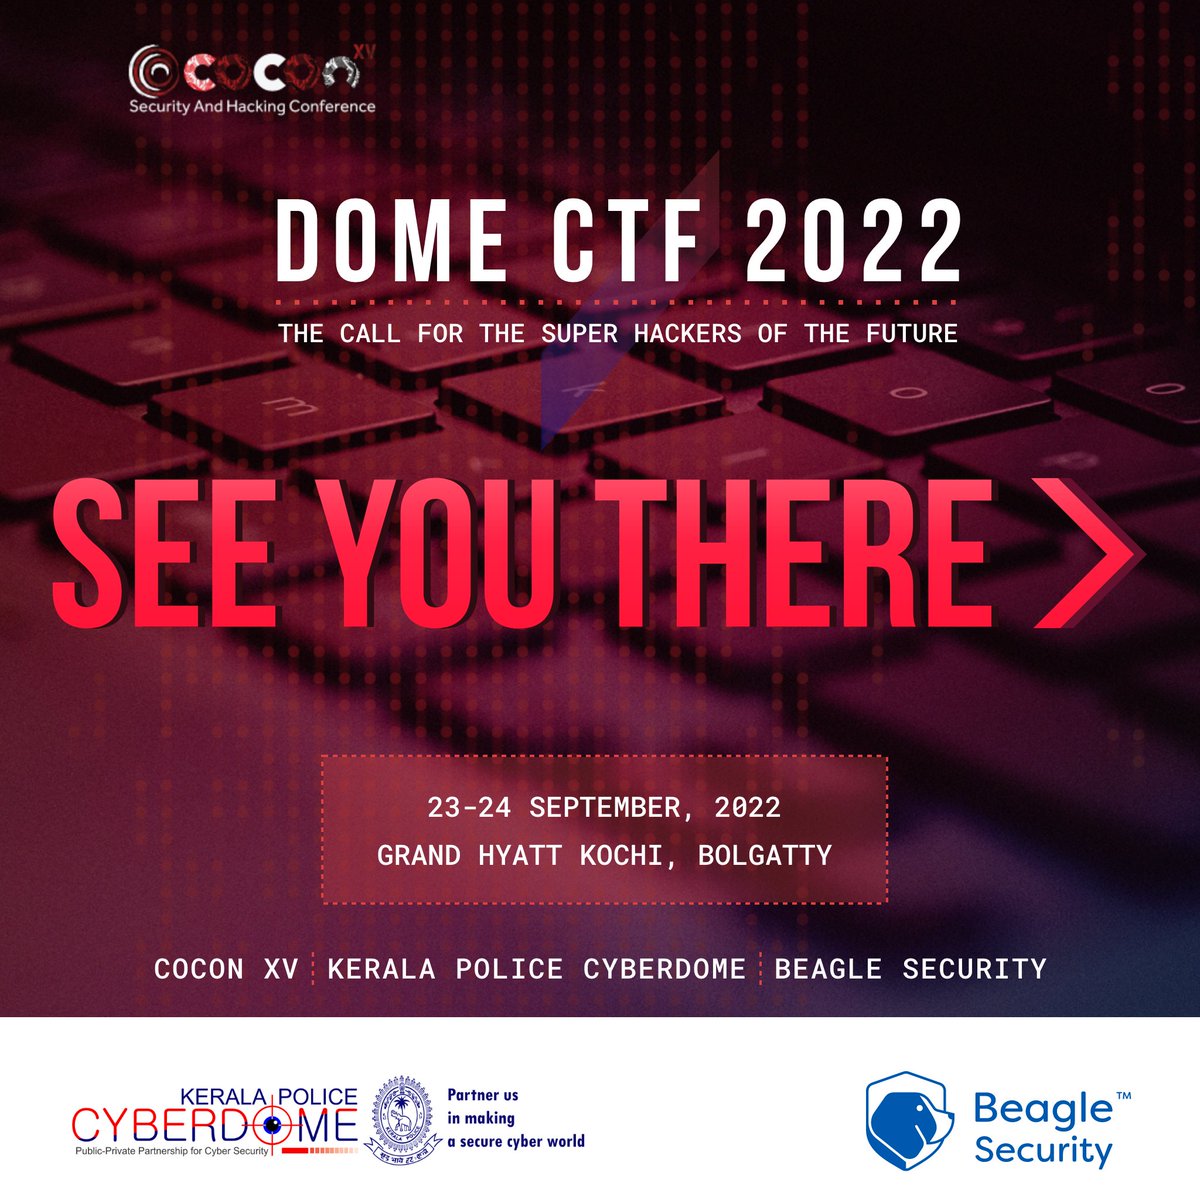 We all are much excited to see you all there!

#CTF #hacking #challenge #domectf #c0c0n2022 #cybersecurity